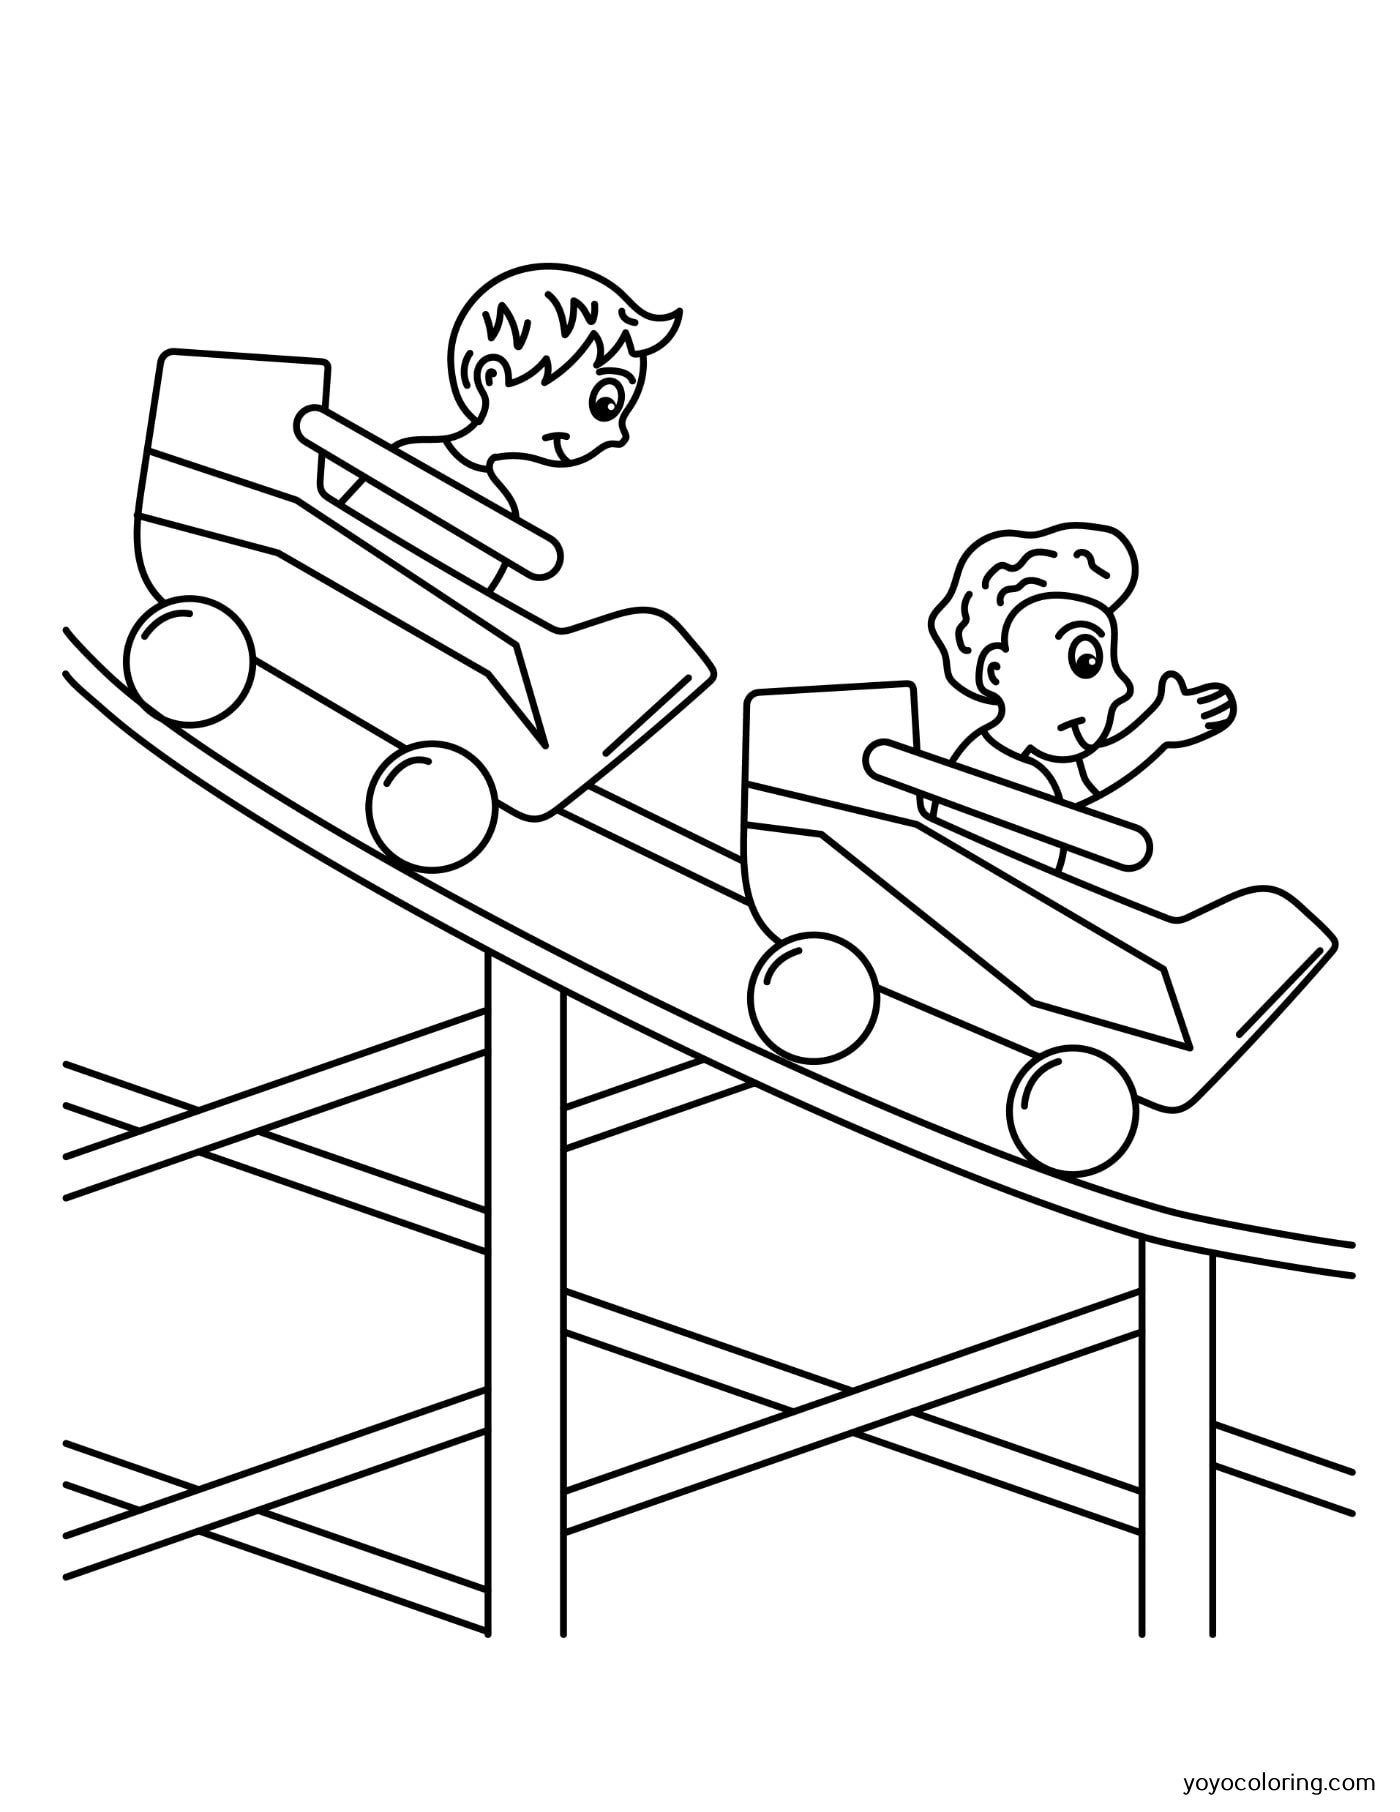 roller coaster Coloring Pages ᗎ Printable Painting Template